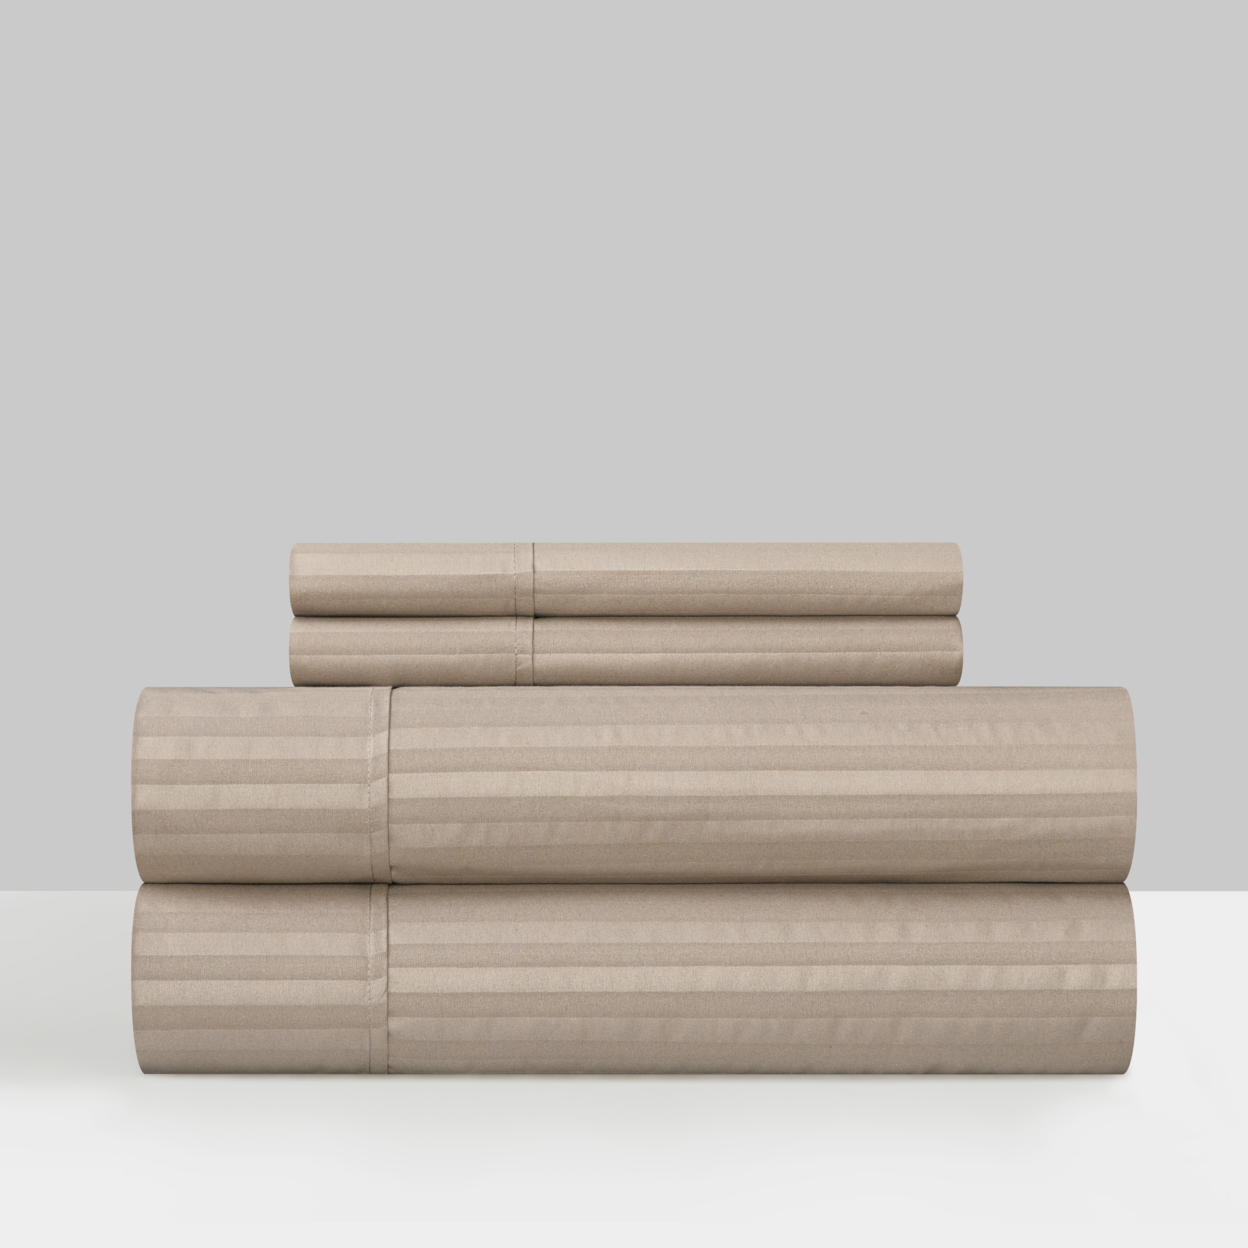 Shina 3 Or 4 Piece Sheet Set Solid Color Striped Pattern Technique - Taupe, Twin